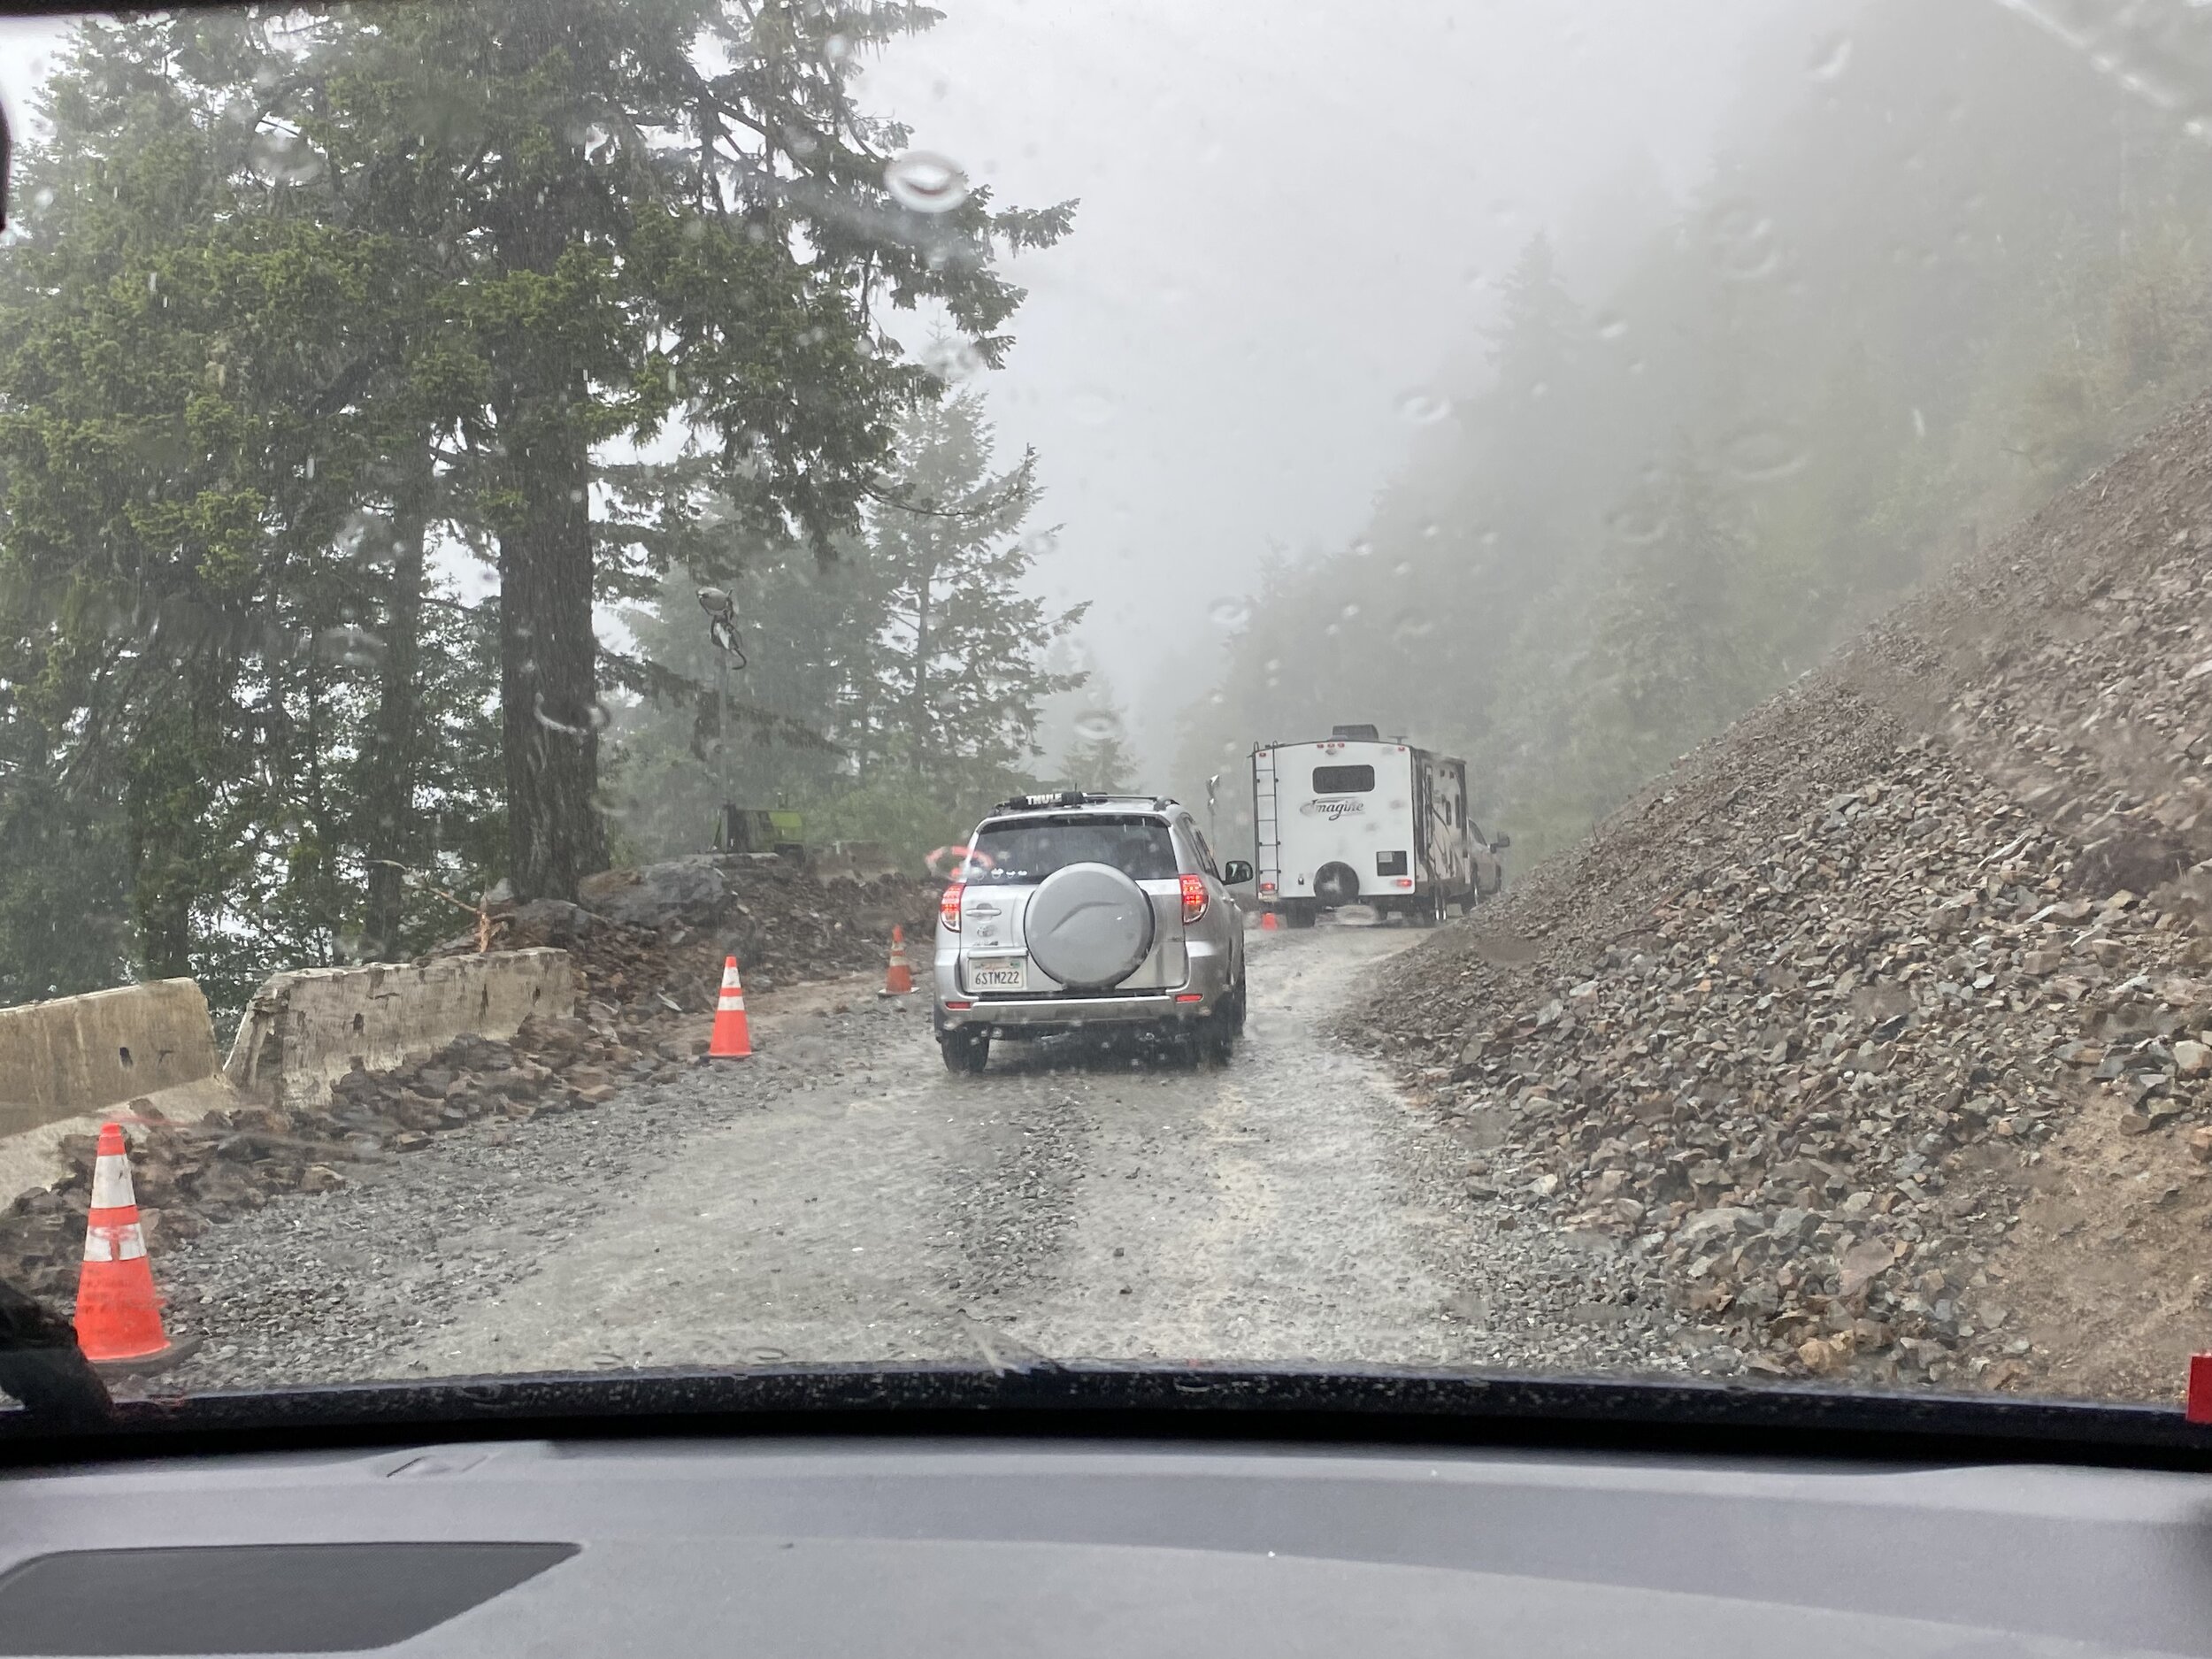 Big construction area fixing part of the road taken out by a rockslide on Hwy 101.  Photo by Karen Boudreaux, June 13, 2021